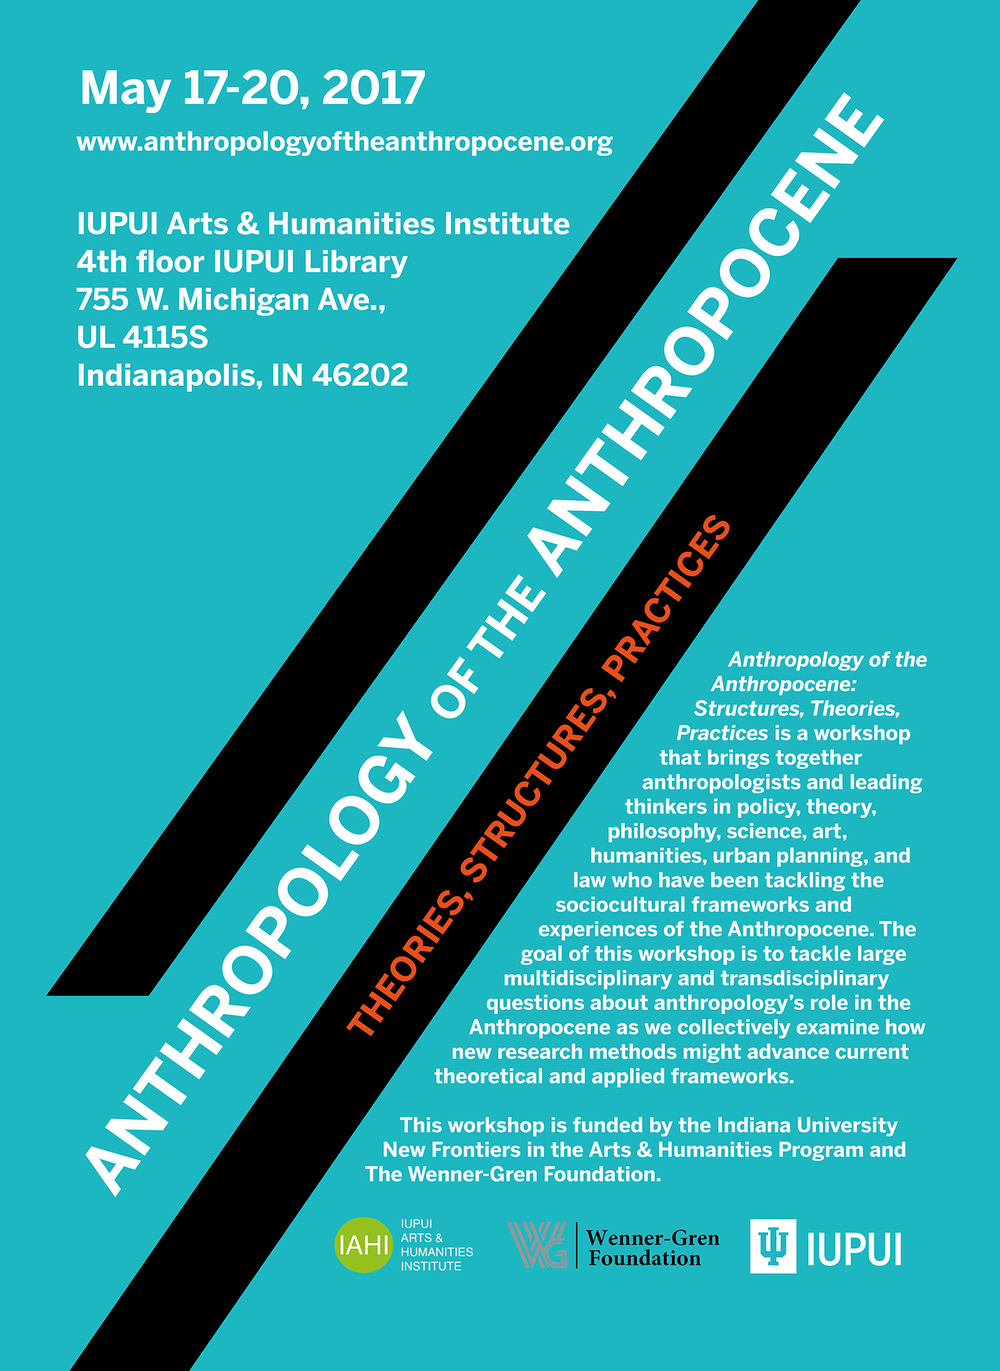 Anthropology of the Anthropocene Conference